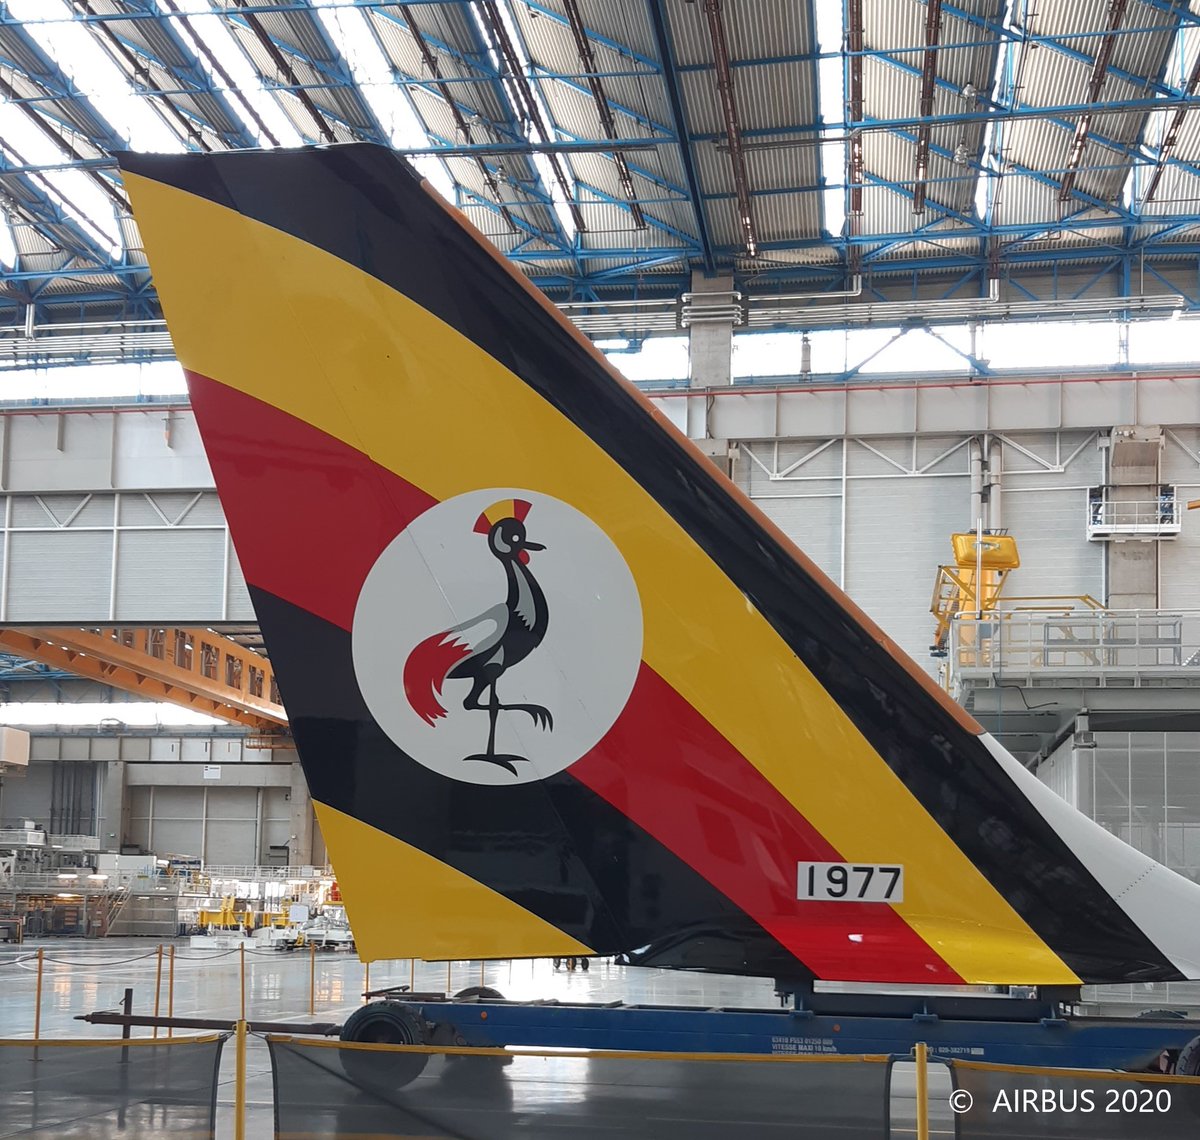 We are putting the pieces together

Even during times of Adversity, our attitudes remain Sharp.

It's because of you that we are, and can achieve so much more.

We shall Fly Soon.

#StaySafe. #MtElgon

Photo Credit: Airbus